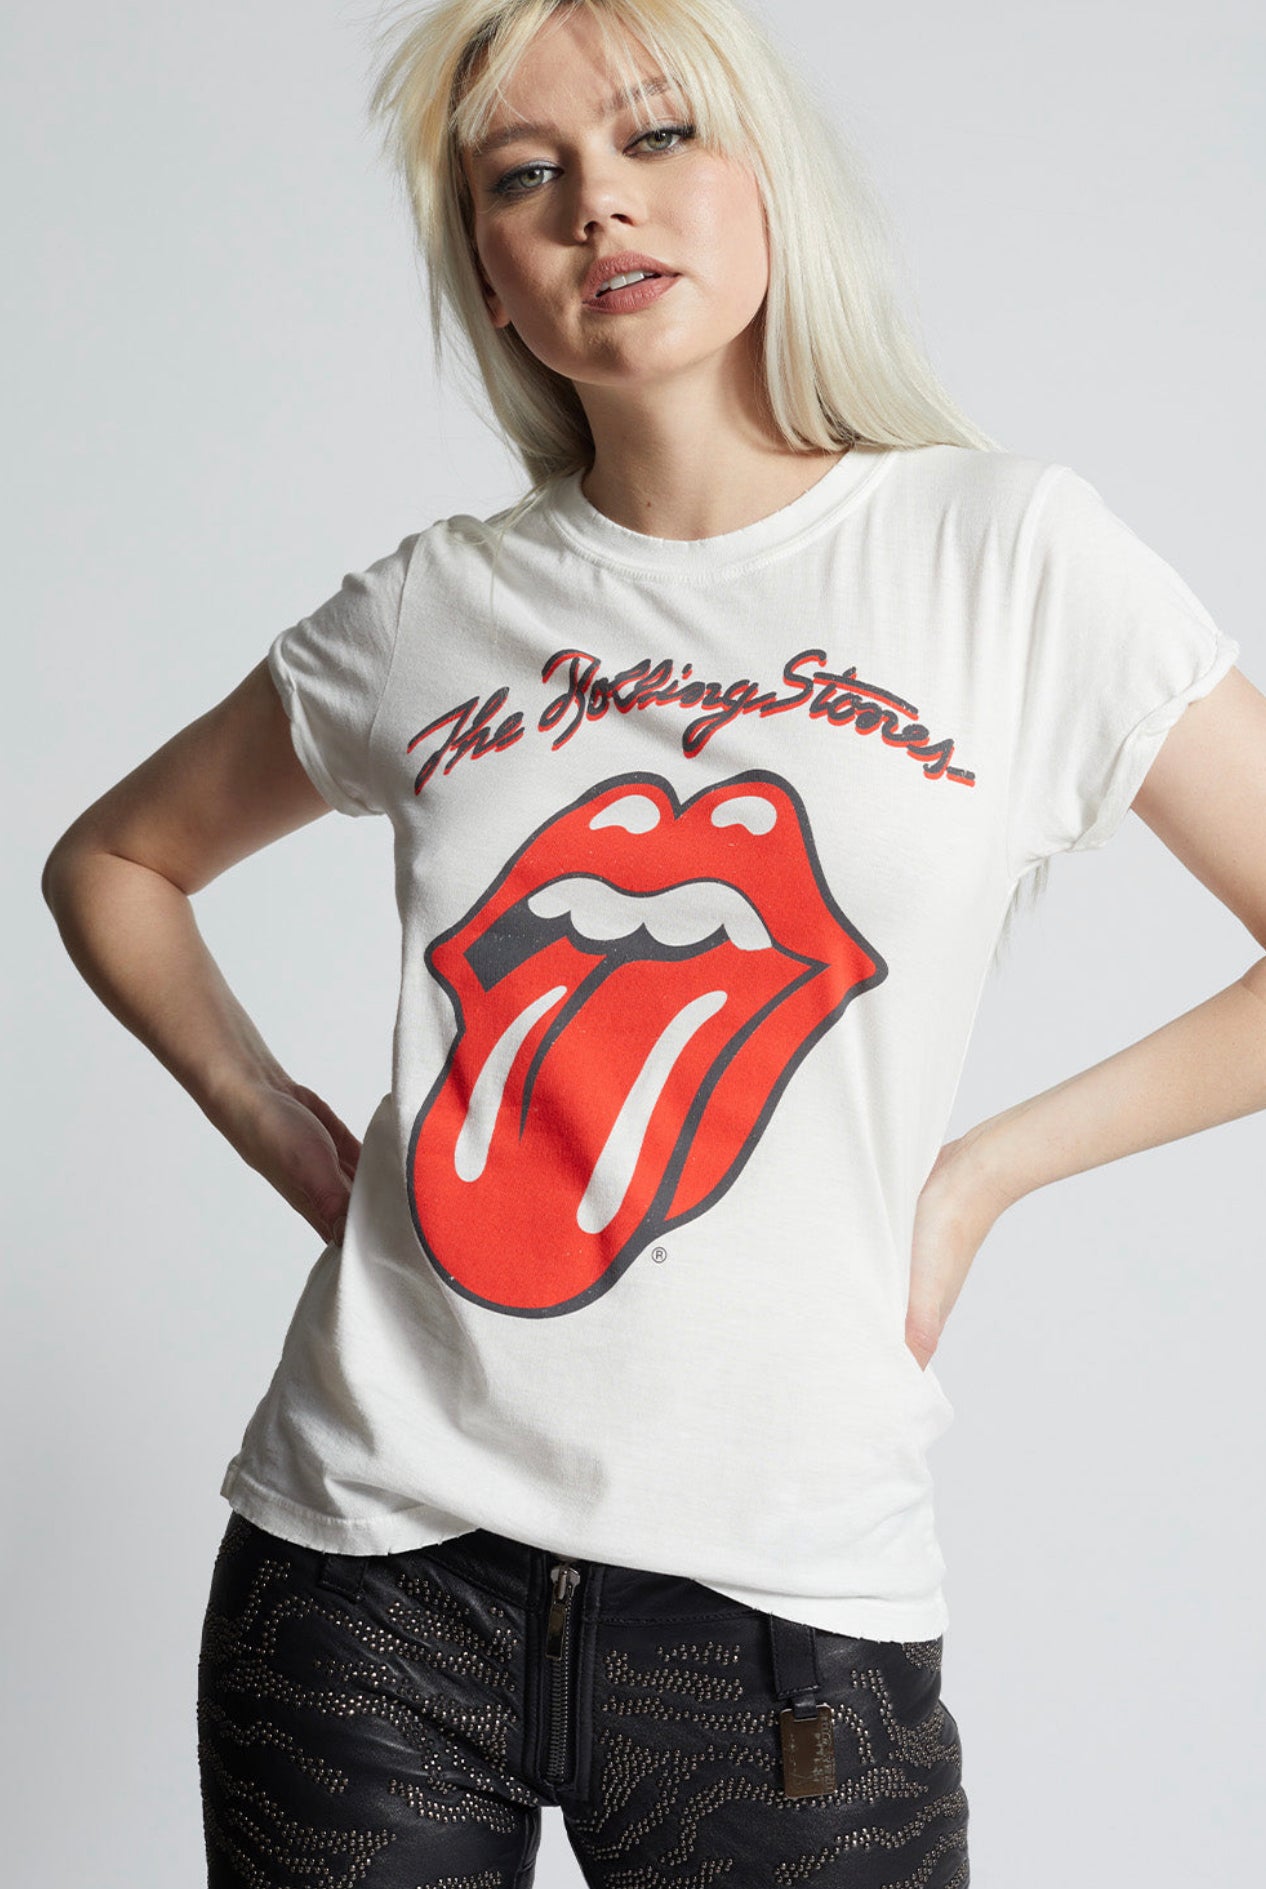 THE ROLLING STONES LIVE! TEE